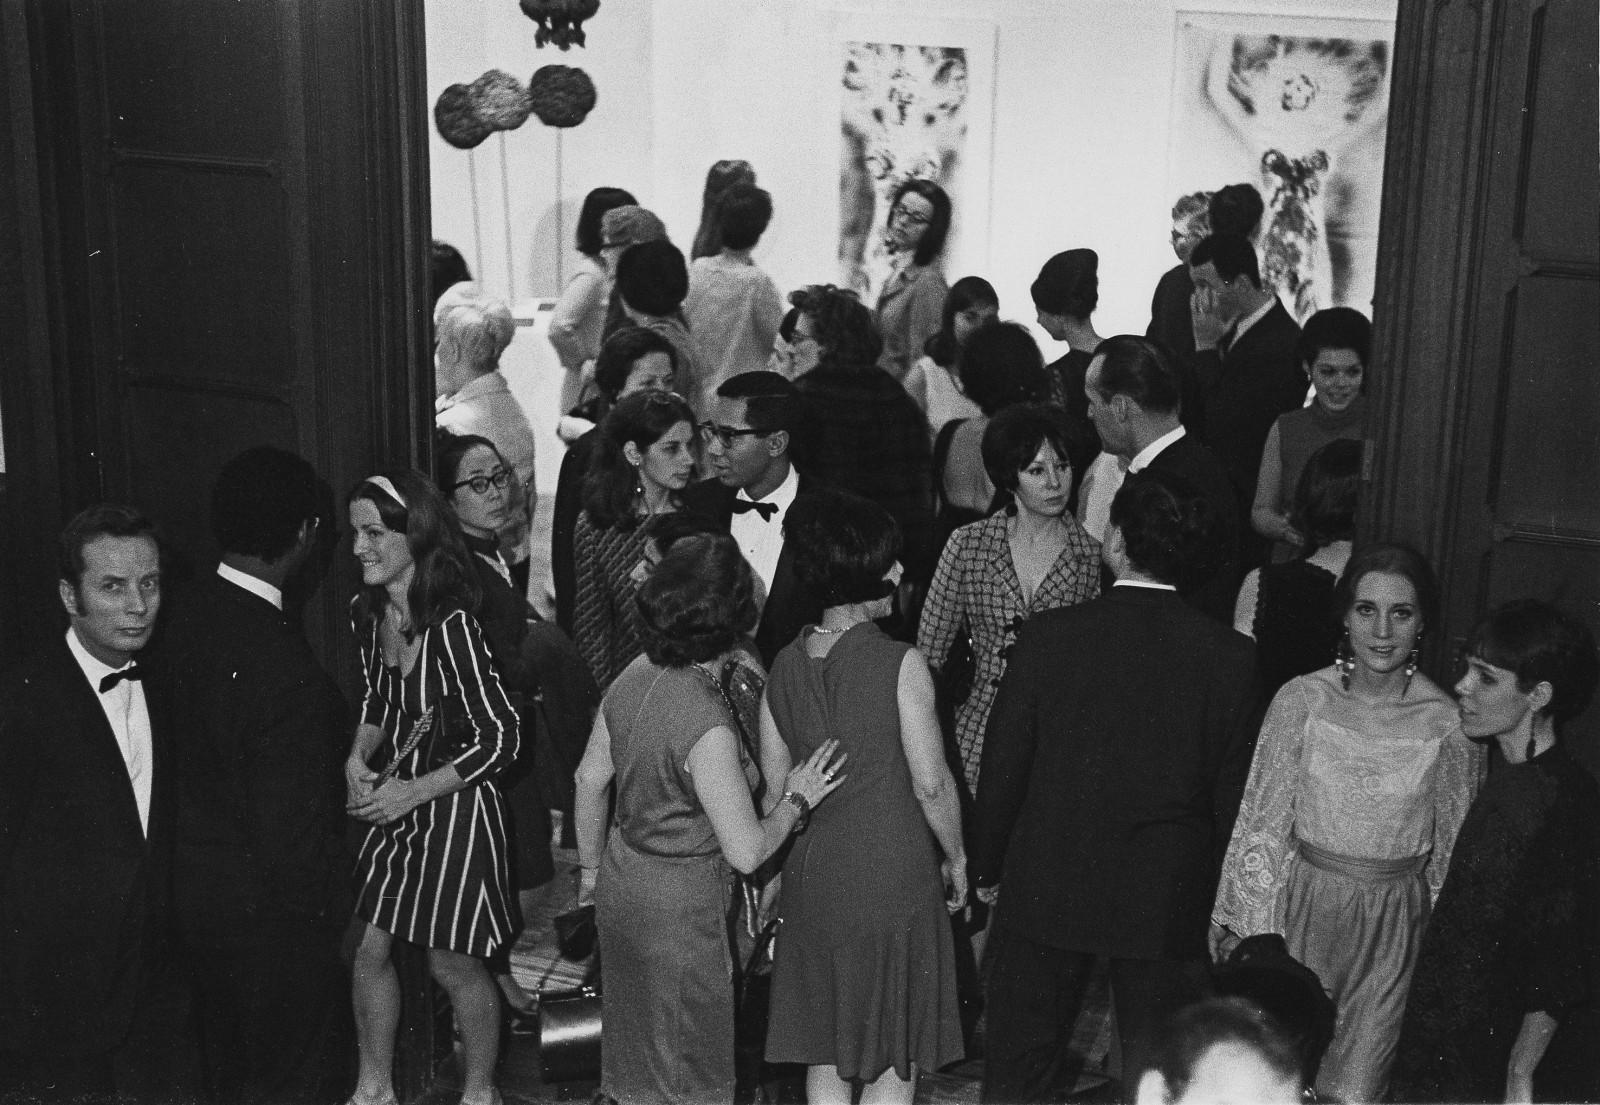 View of the exhibition, "Yves Klein", Jewish Museum, 1967